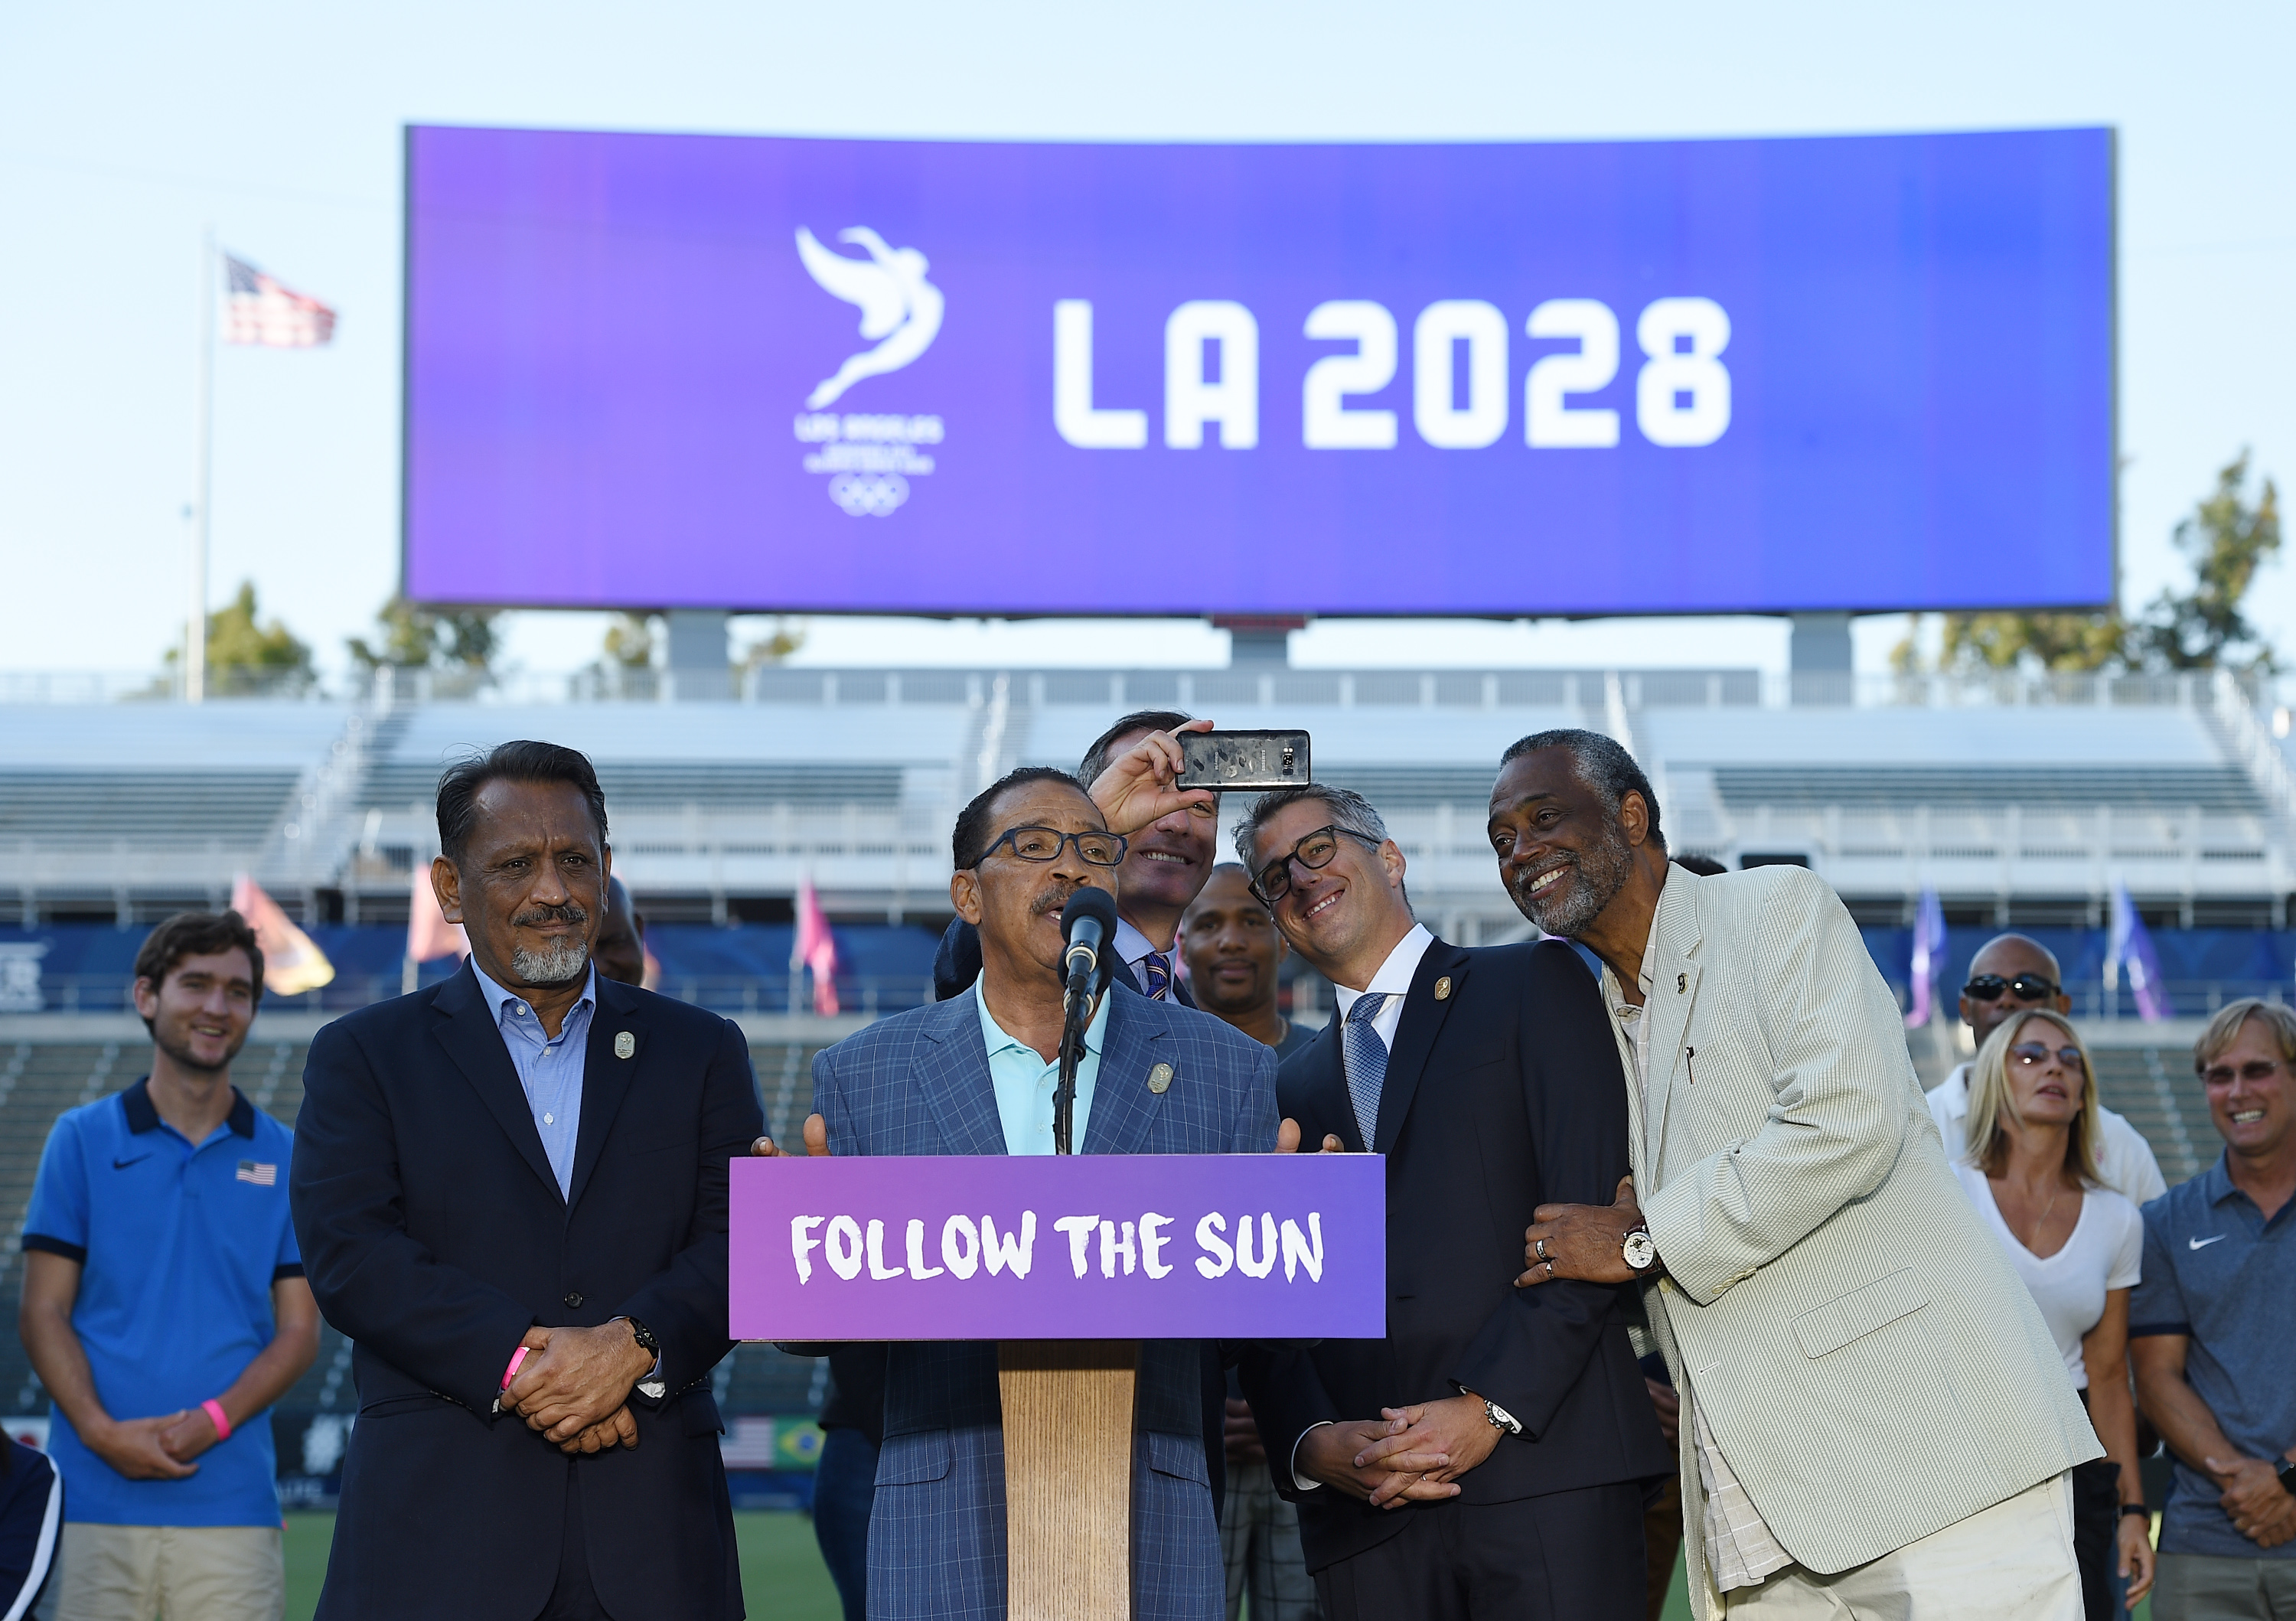 CARSON, CA - JULY 31: Los Angeles Mayor Eric Garcetti takes a selfie with LA 2024 Bid Chairman Casey Wasserman (2nd R) while Los Angeles City Council President Herb Wesson speaks at the podium after announcing a deal with the International Olympic Committee to host the 2028 Summer Olympics during a news conference at StubHub Center July 3, 2017 in Carson, California. 